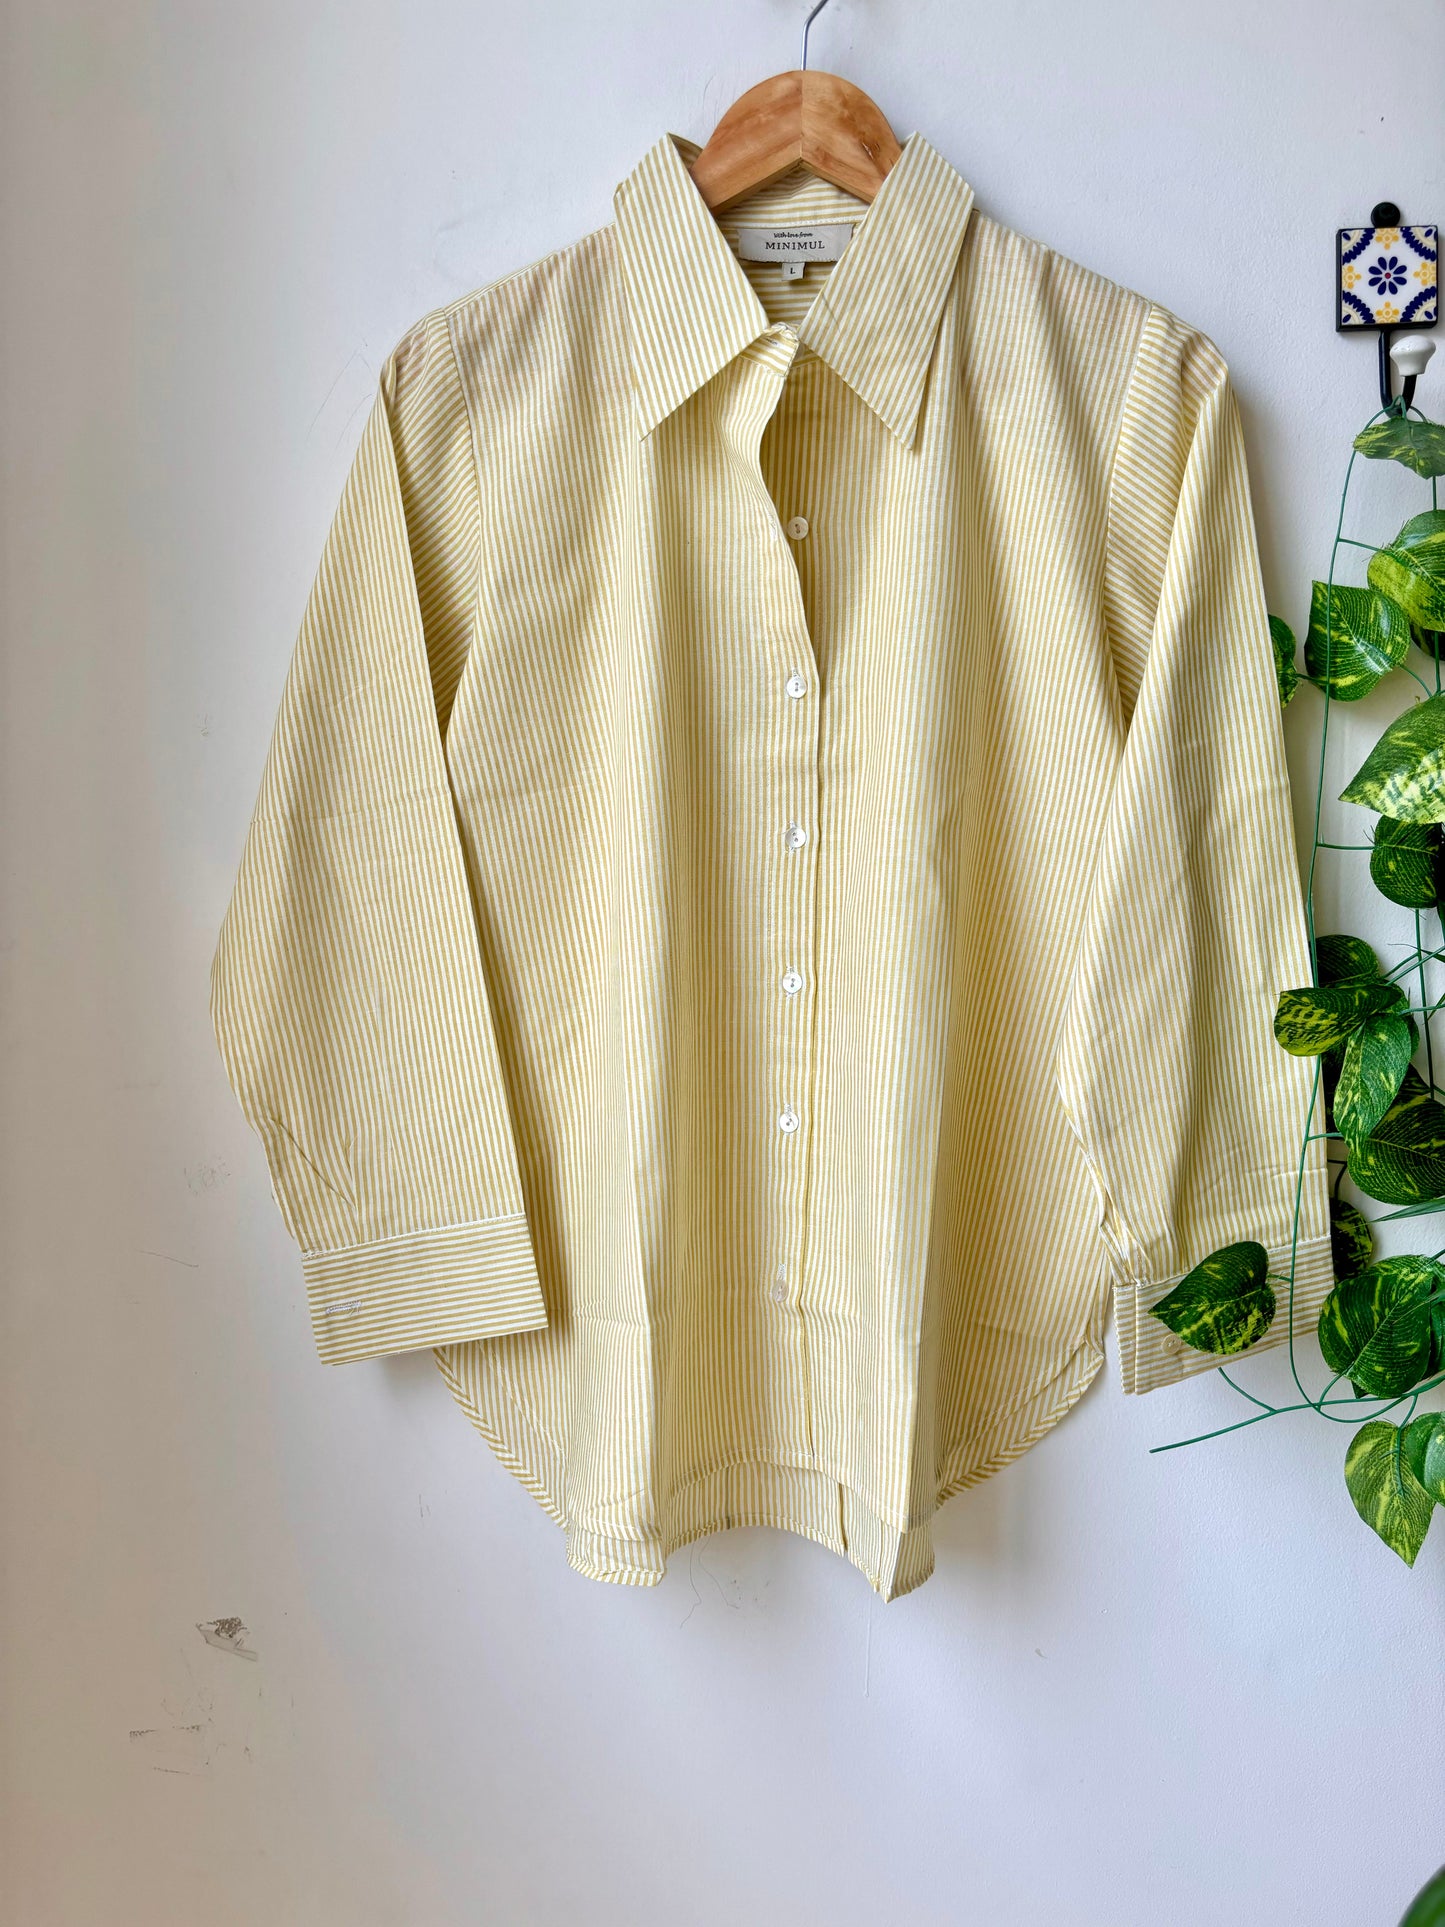 The Everyday Cotton Shirts